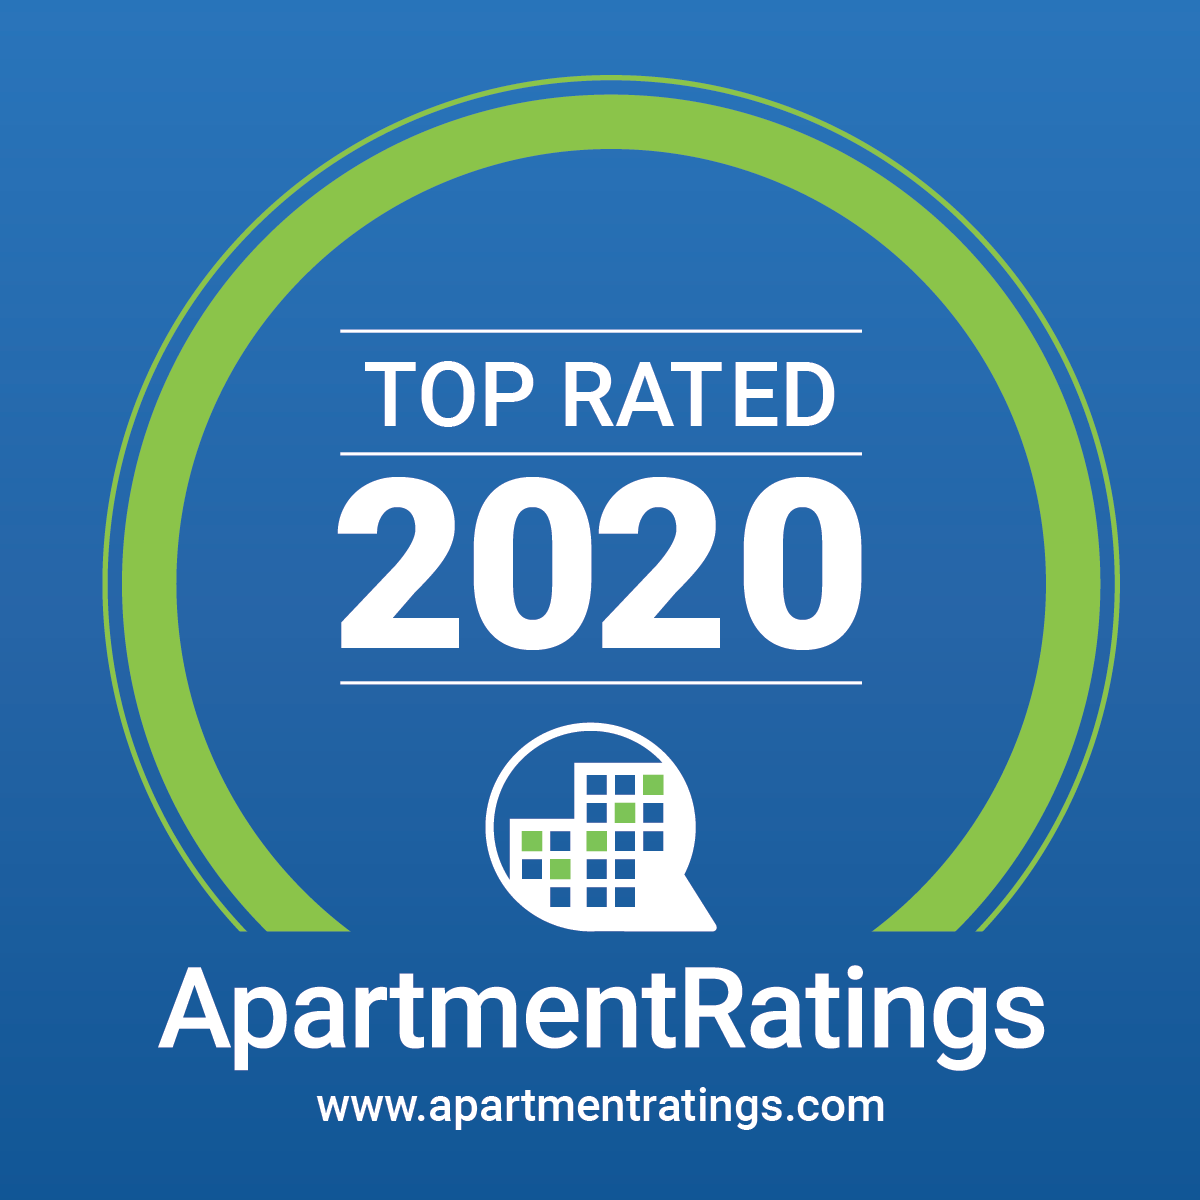 Top Rated 2020 ApartmentRatings